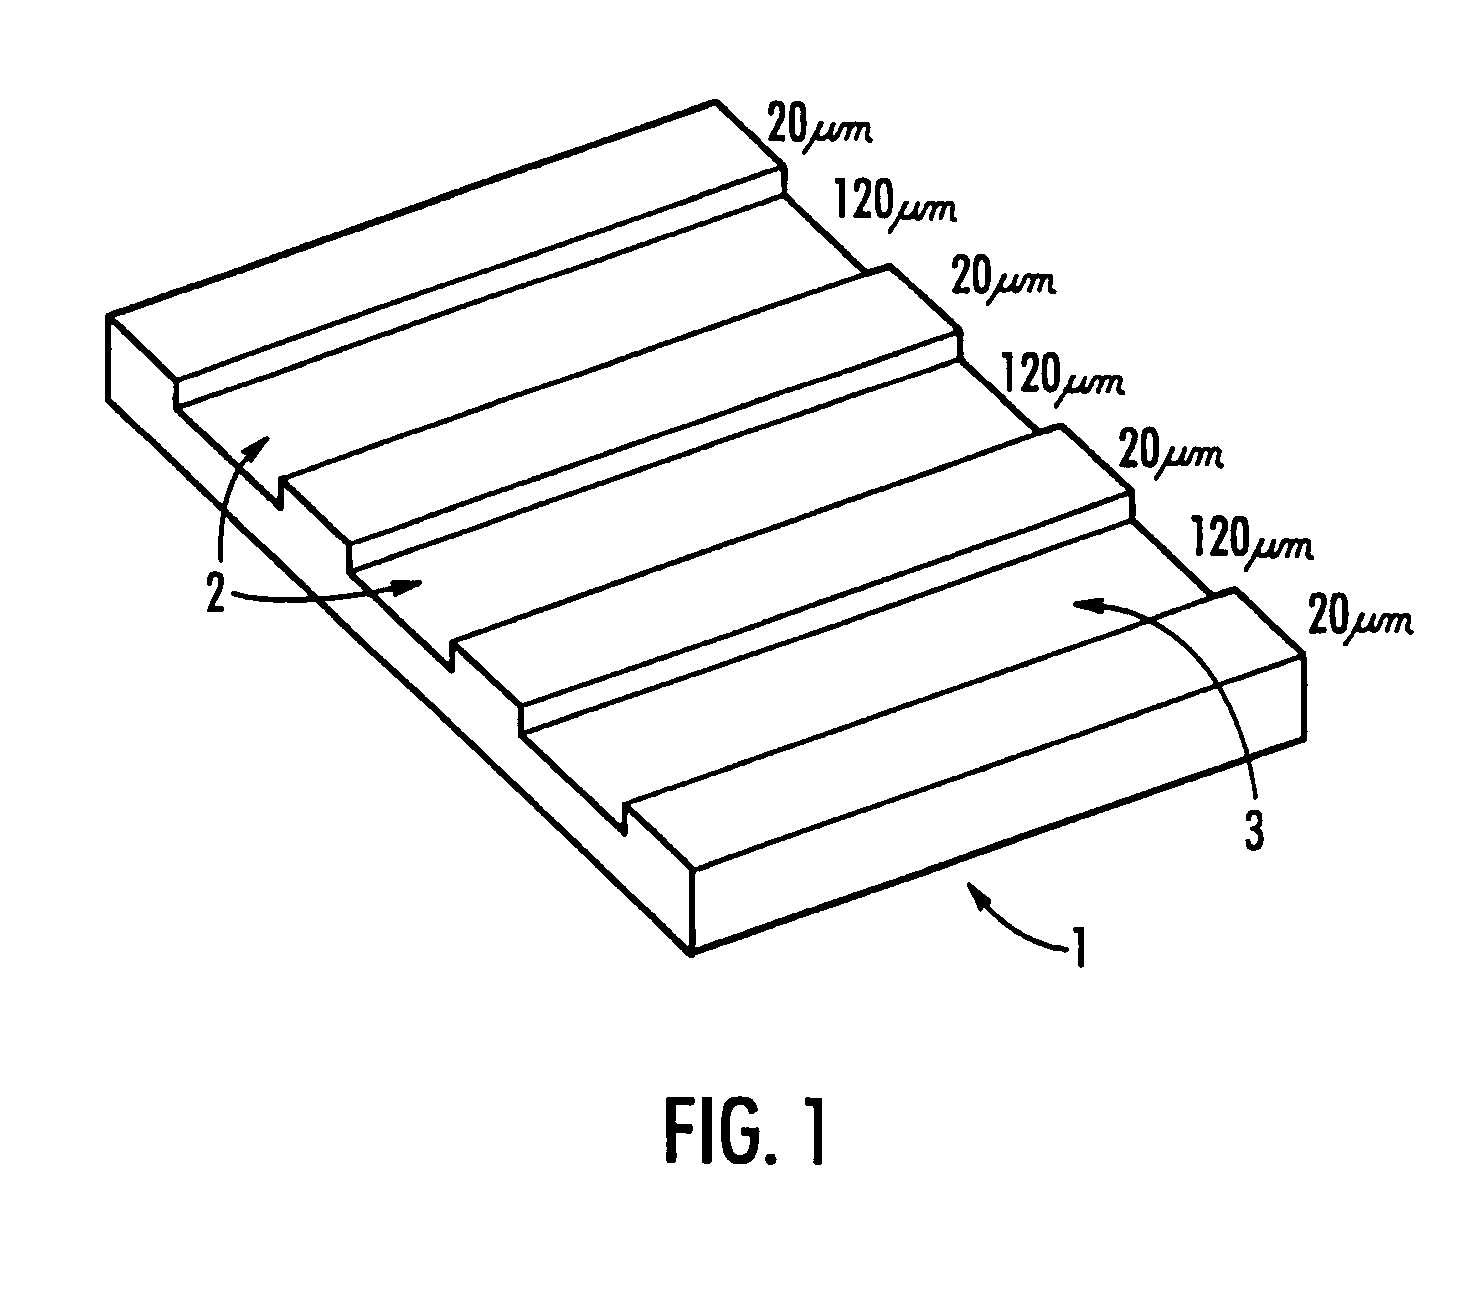 Microelectromechanical devices useful for manipulating cells or embryos, kits thereof, method of making same, and methods of use thereof